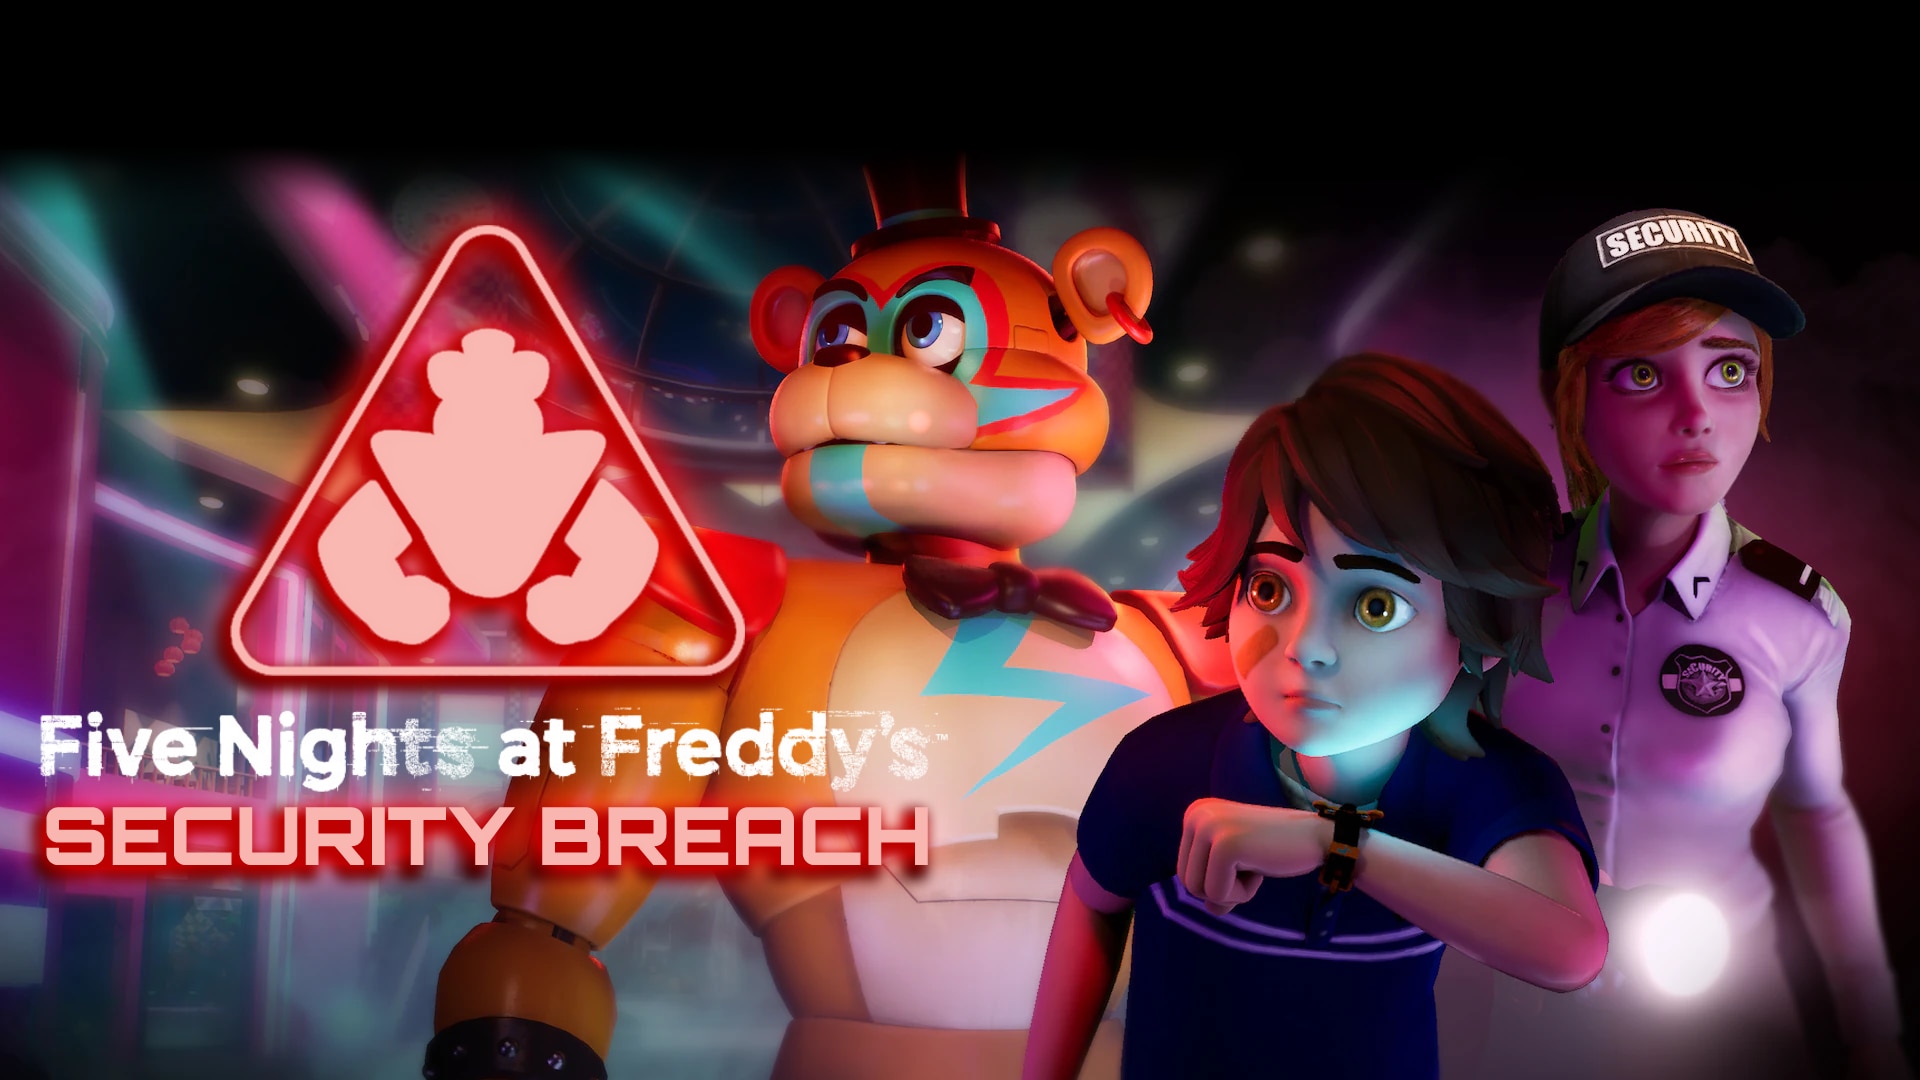 Five Nights at Freddy's: Security Breach on Steam